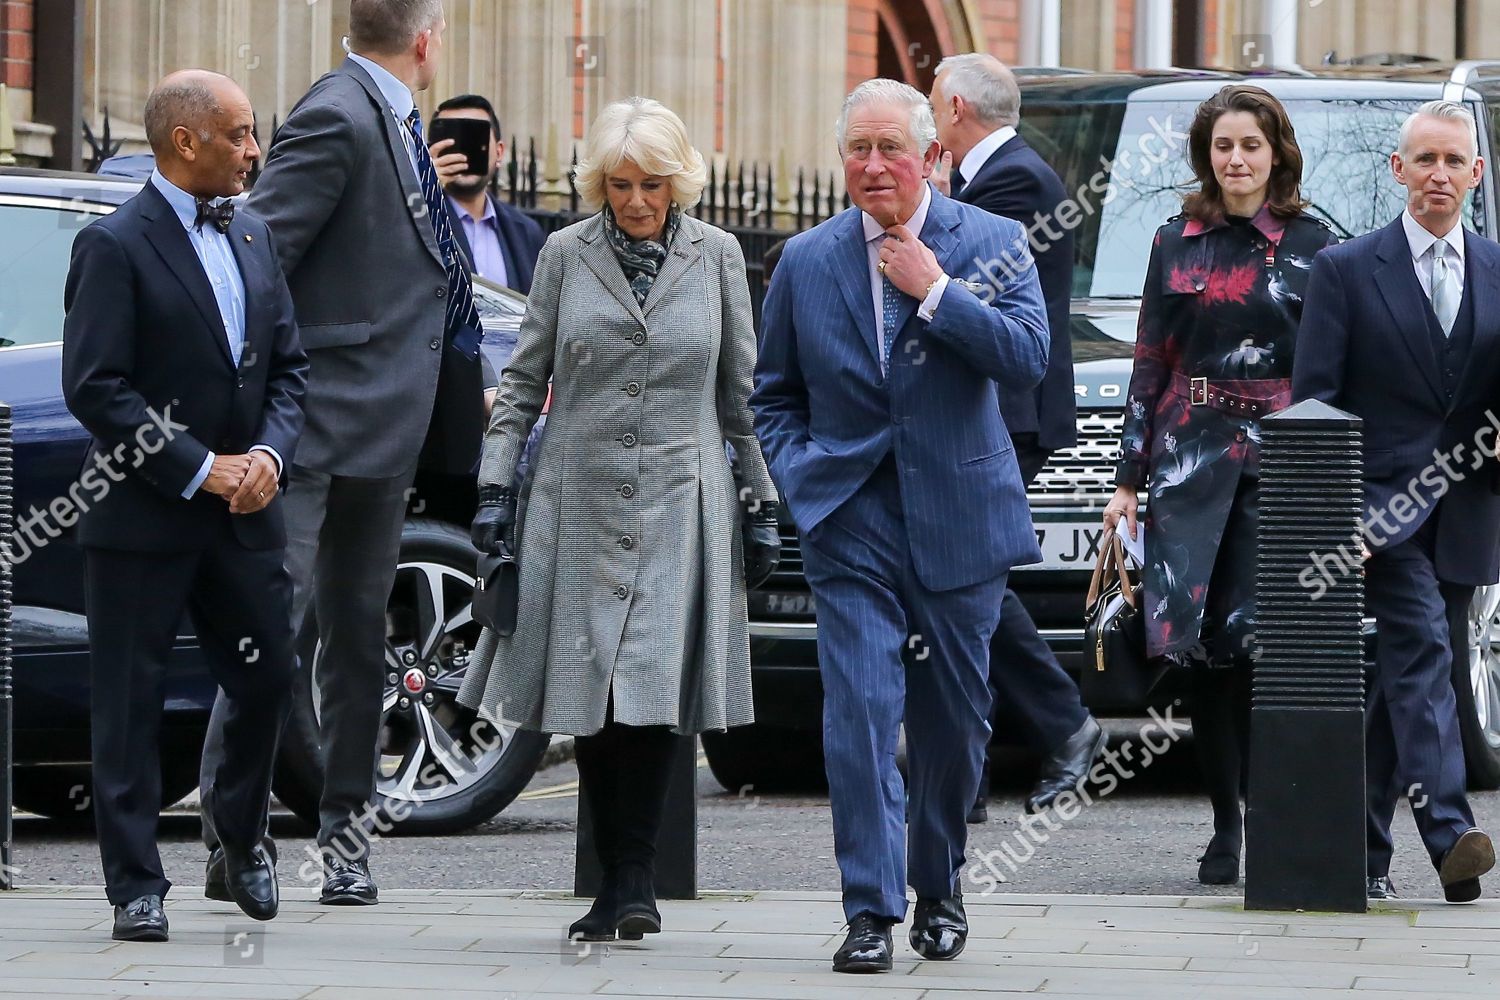 prince-charles-and-camilla-duchess-of-cornwall-visit-to-the-supreme-court-london-uk-shutterstock-editorial-10088523a.jpg